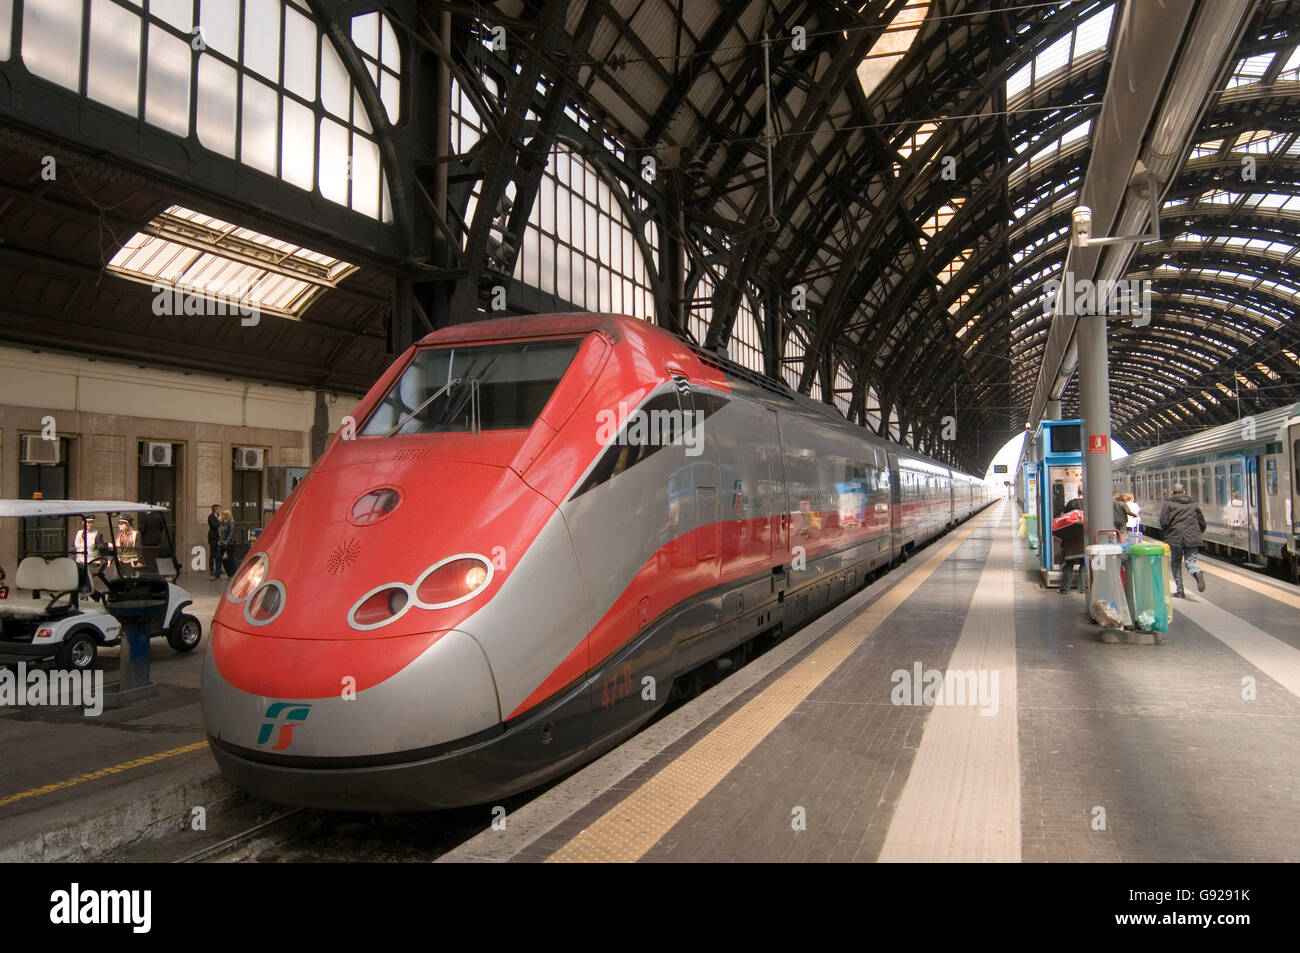 Frecciarossa high speed trains, operated by Trenitalia train fast italy public transport  in Milan station Stock Photo